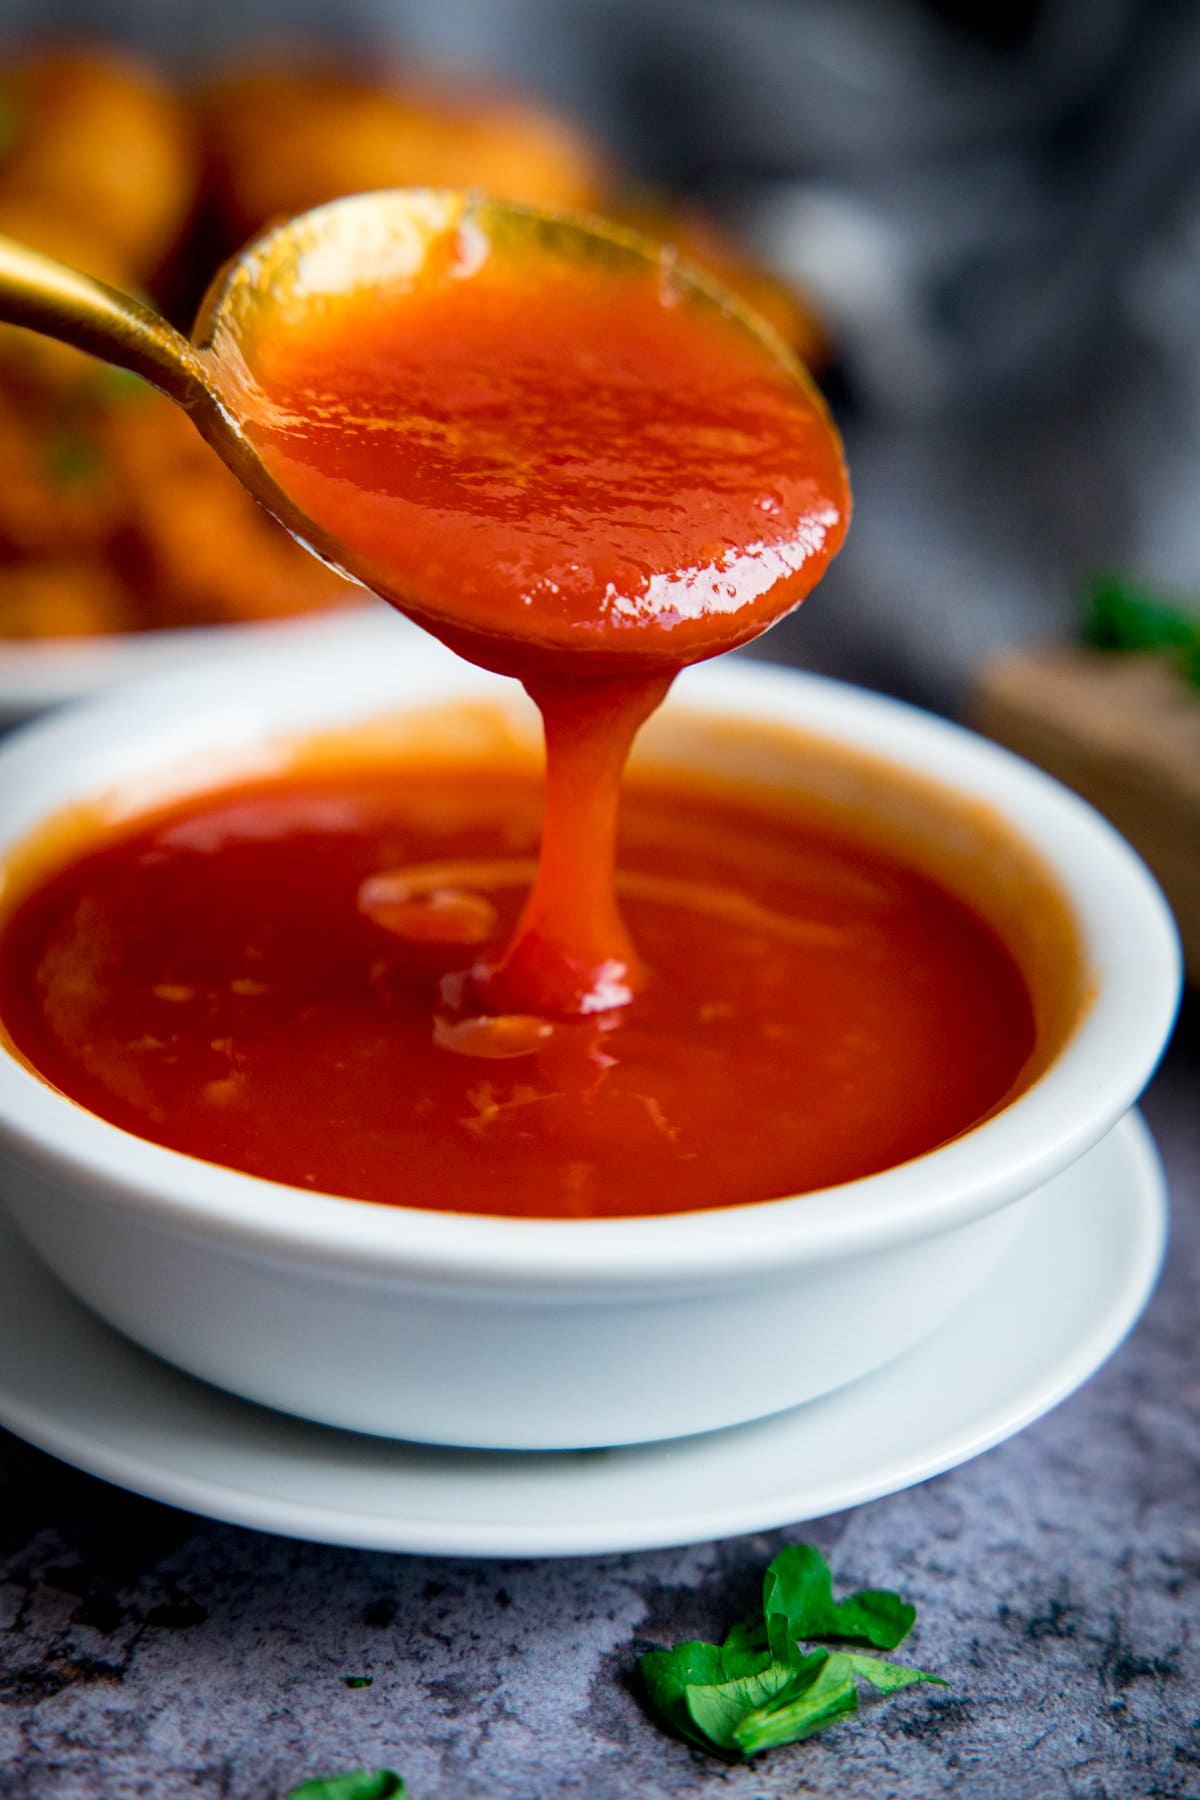 Spoonful of sweet and sour sauce being poured into a small white bowl of sweet and sour sauce